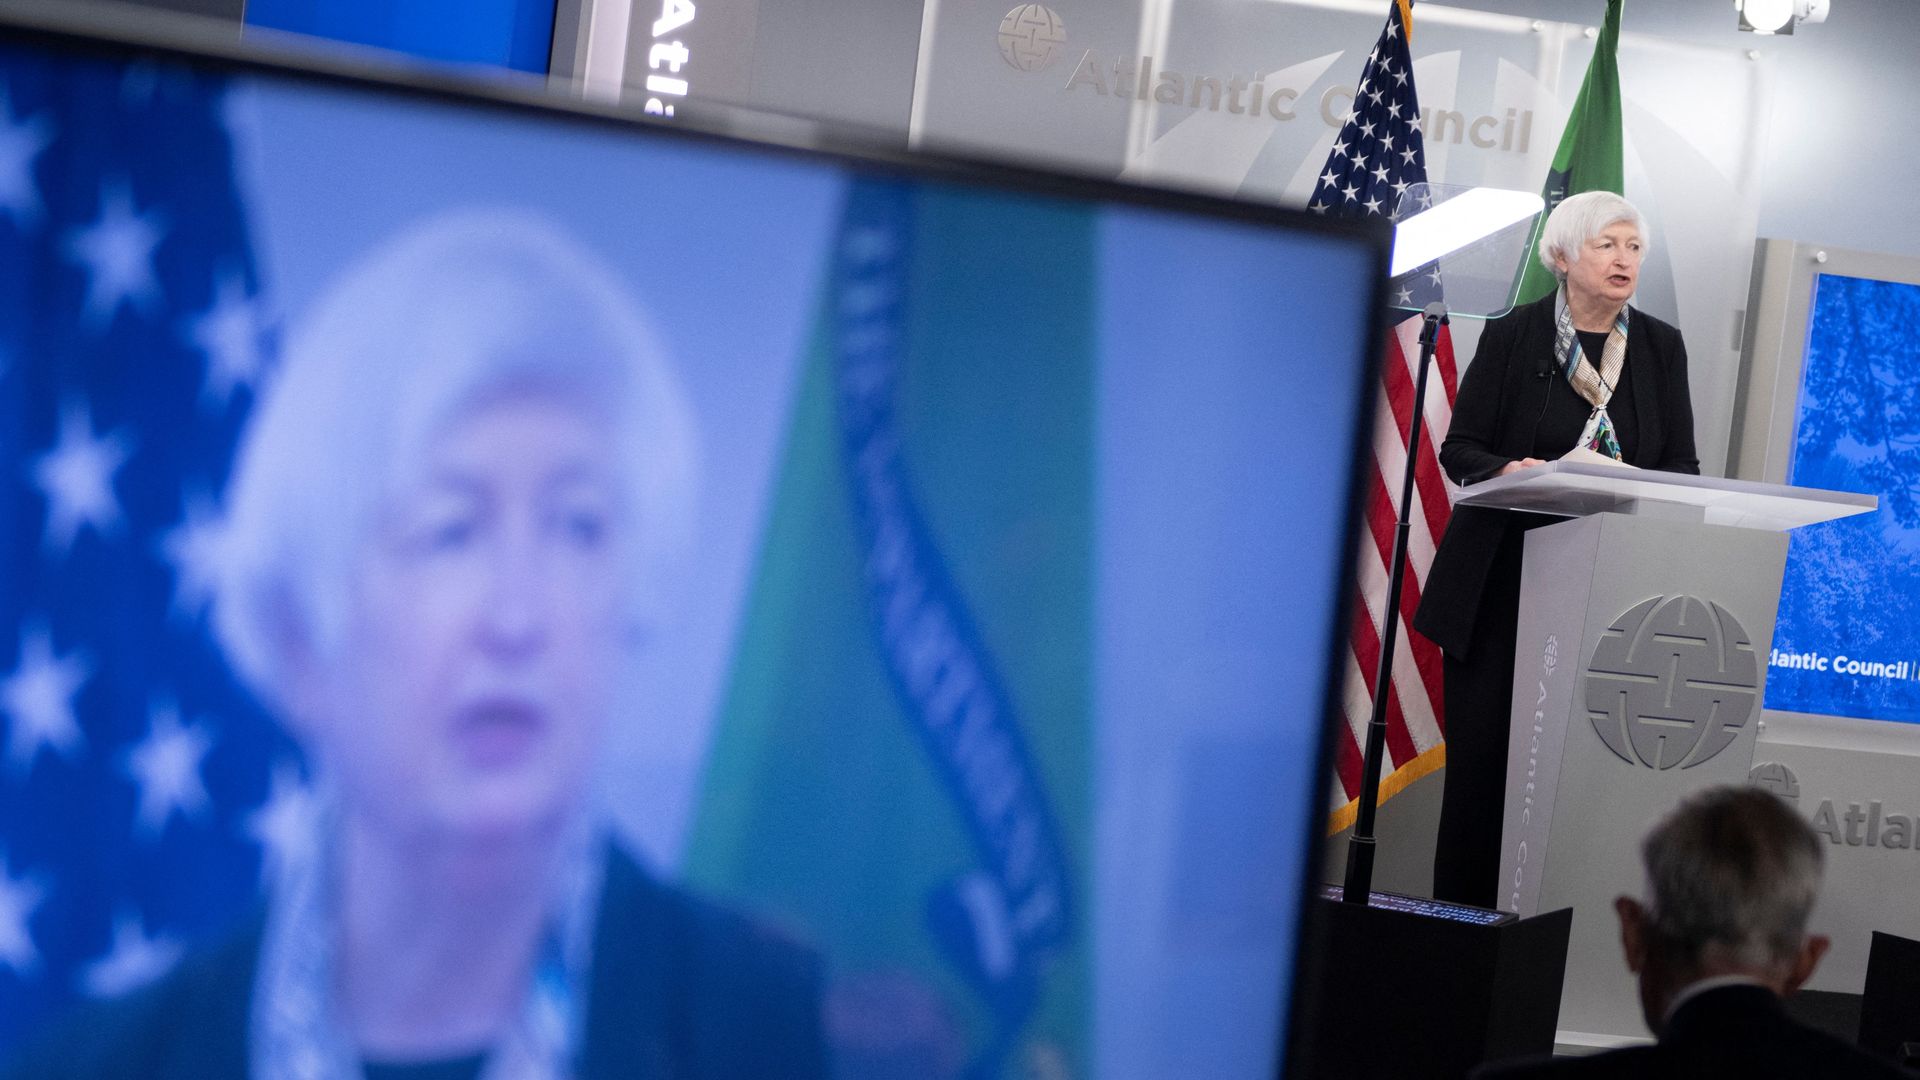 Treasury Secretary Janet Yellen is seen speaking news to a big-screen image of herself while addressing the Atlantic Council.